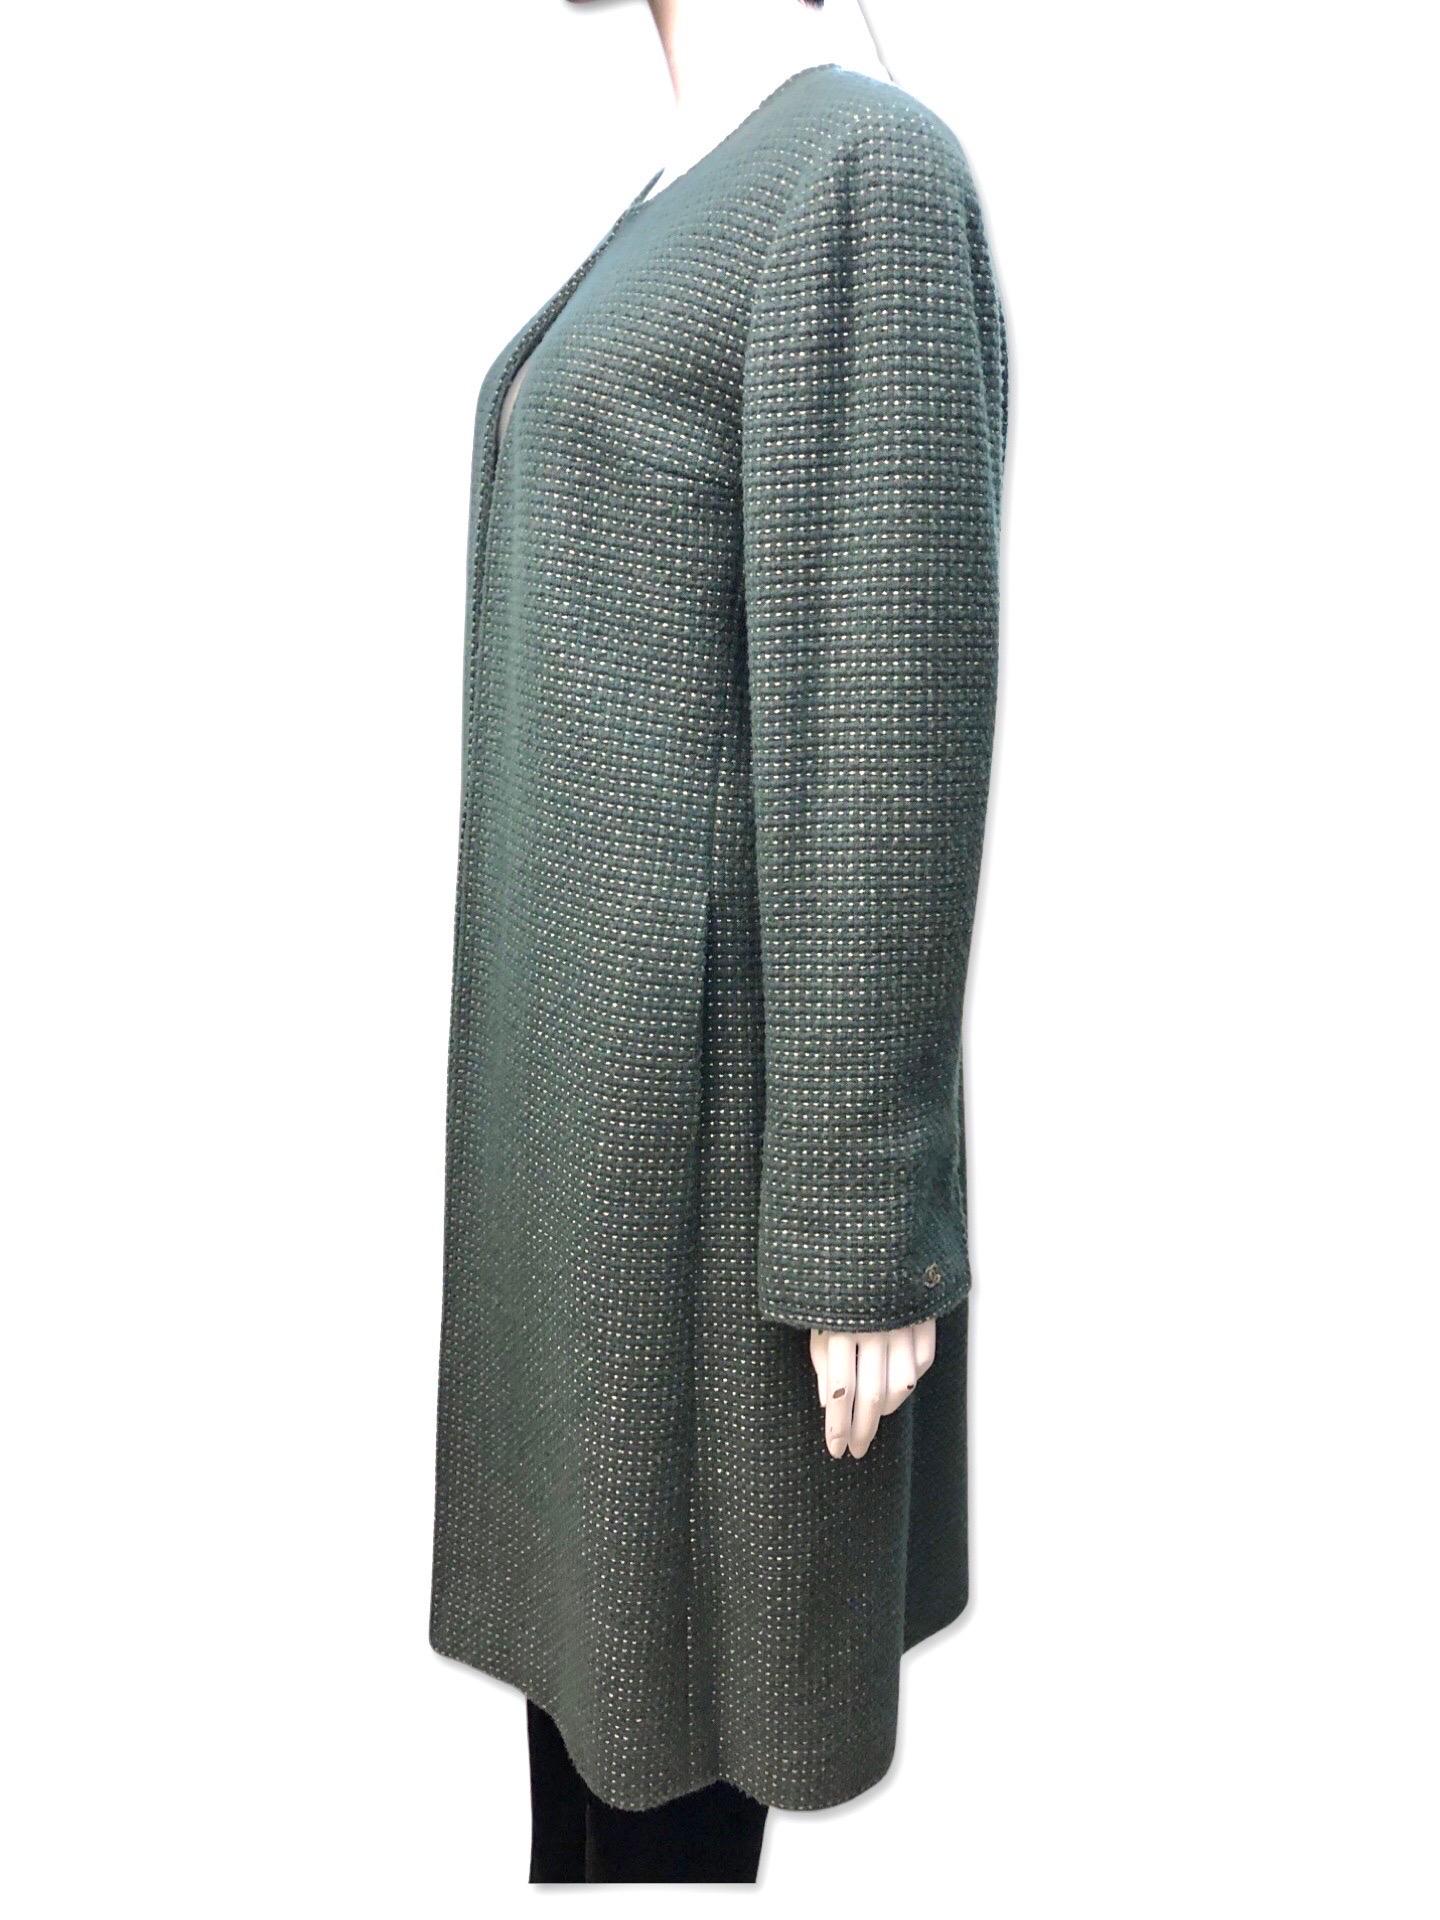 Women's or Men's Chanel Green and Gold Tweed Wool Coat  For Sale